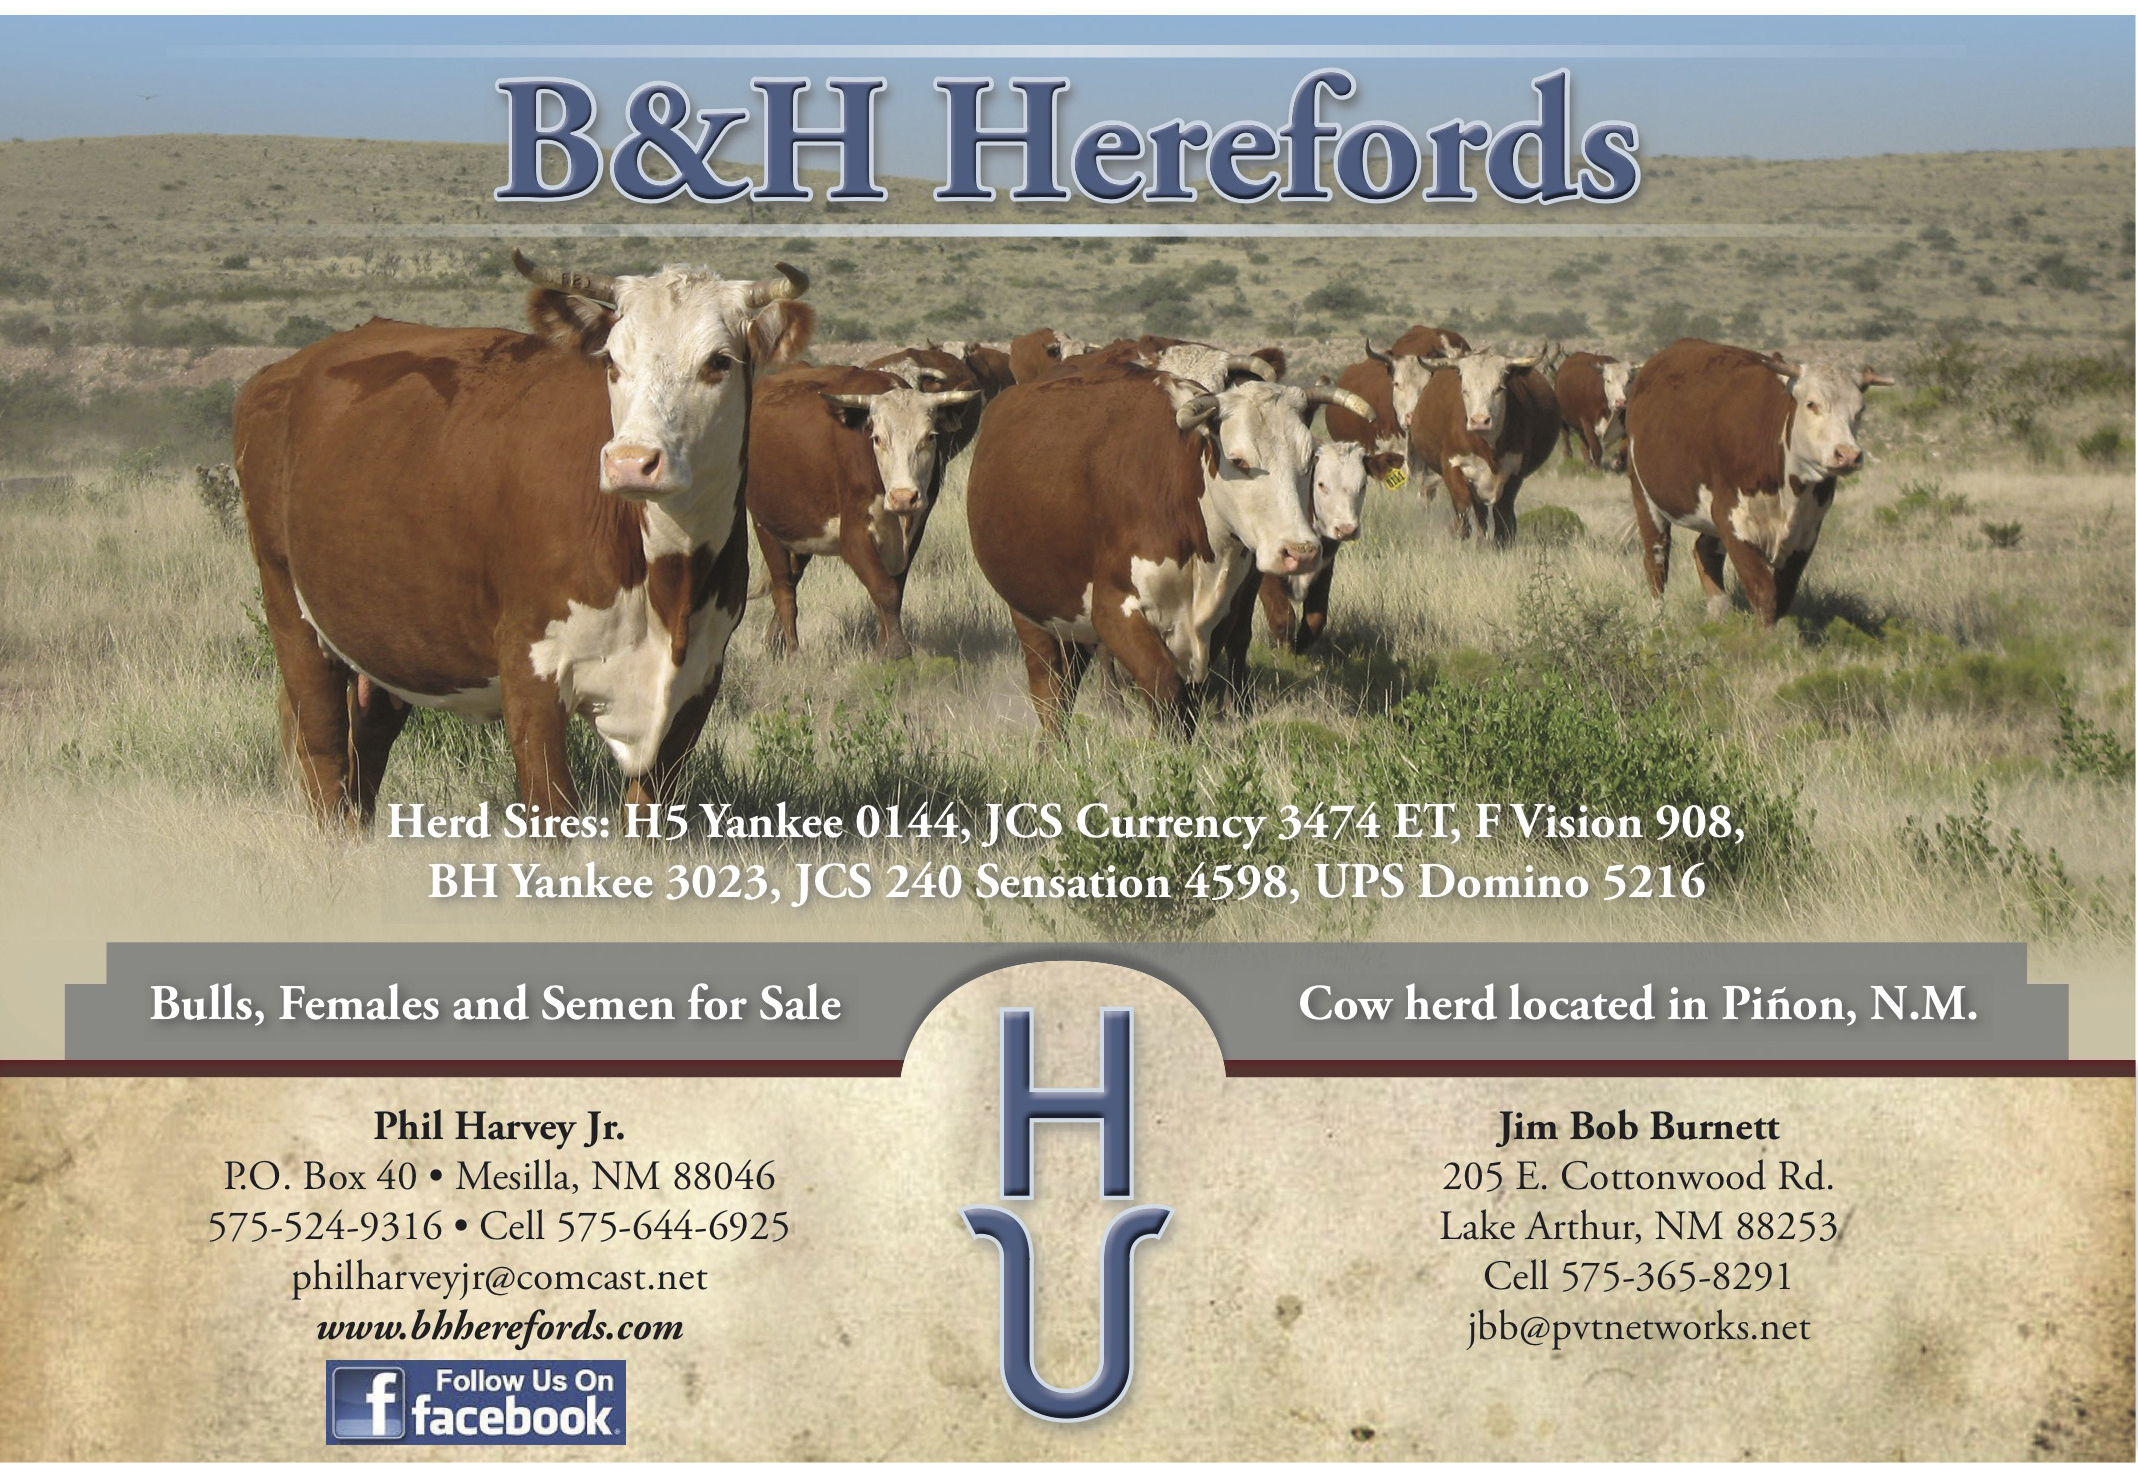 7 Reasons To Advertise in the July Hereford World